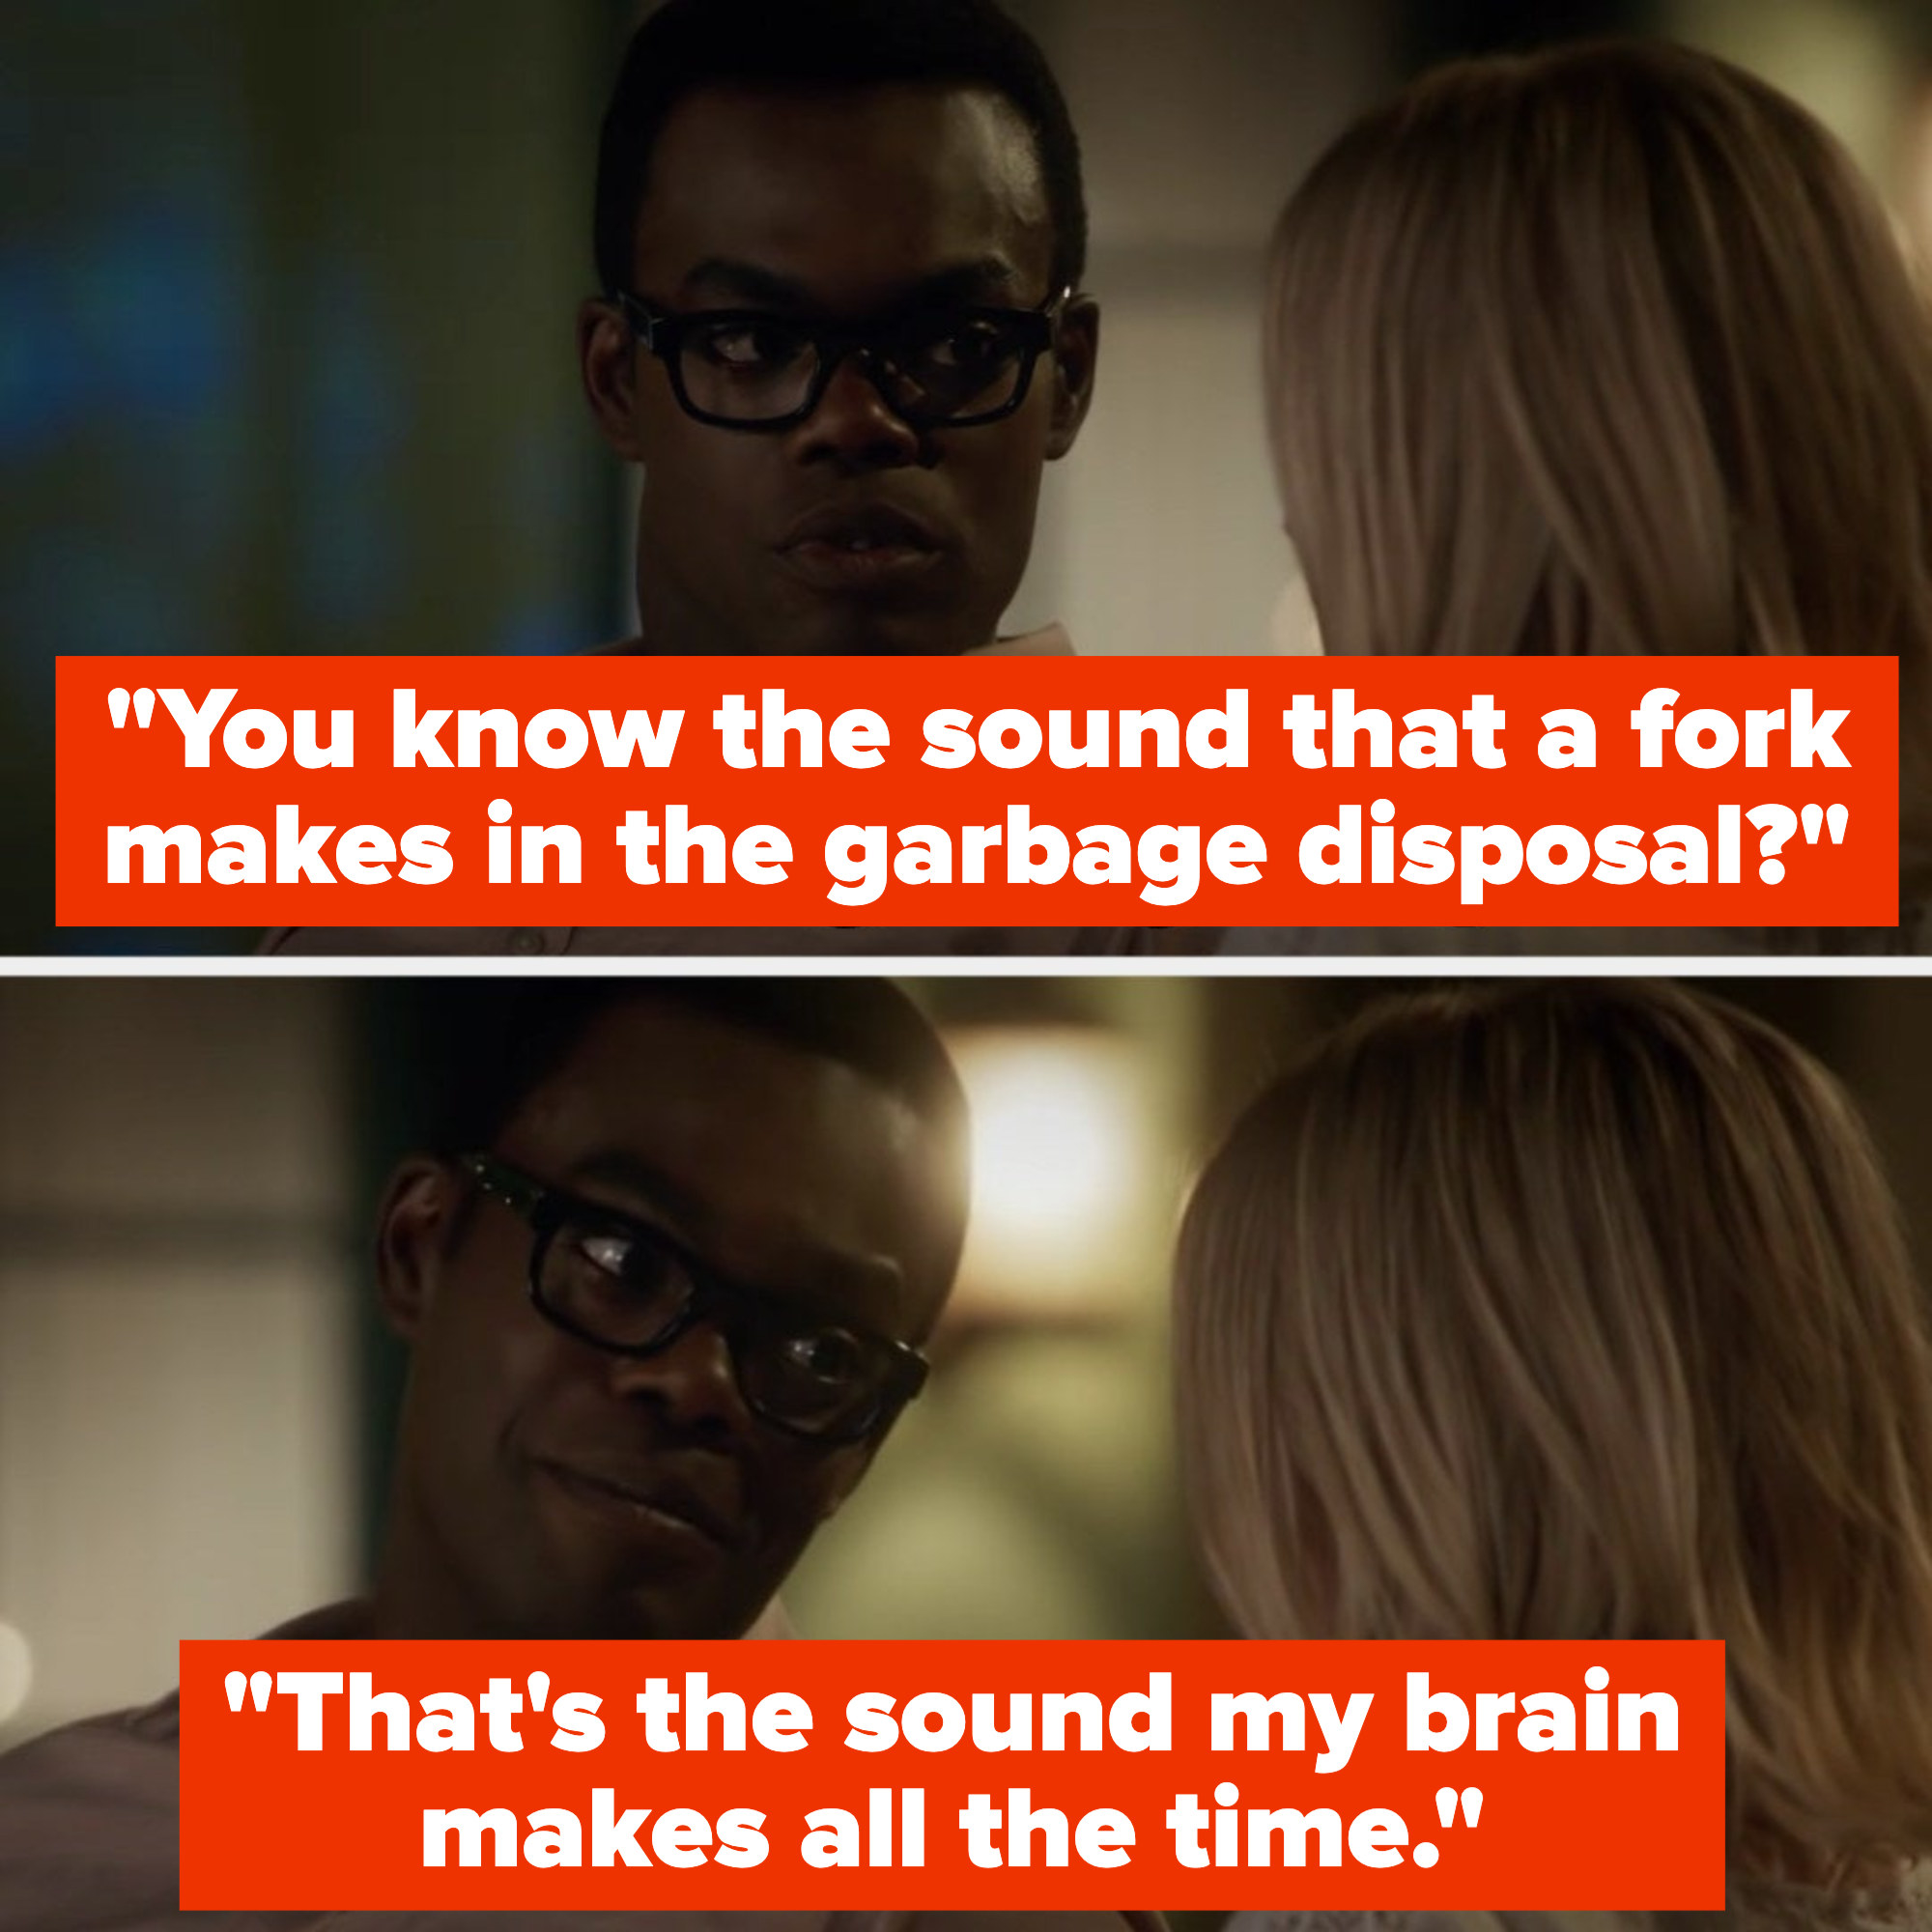 Chidi to Eleanor: &quot;you know the sound that a fork makes in the garbage disposal? that&#x27;s the sound my brain makes all the time&quot;